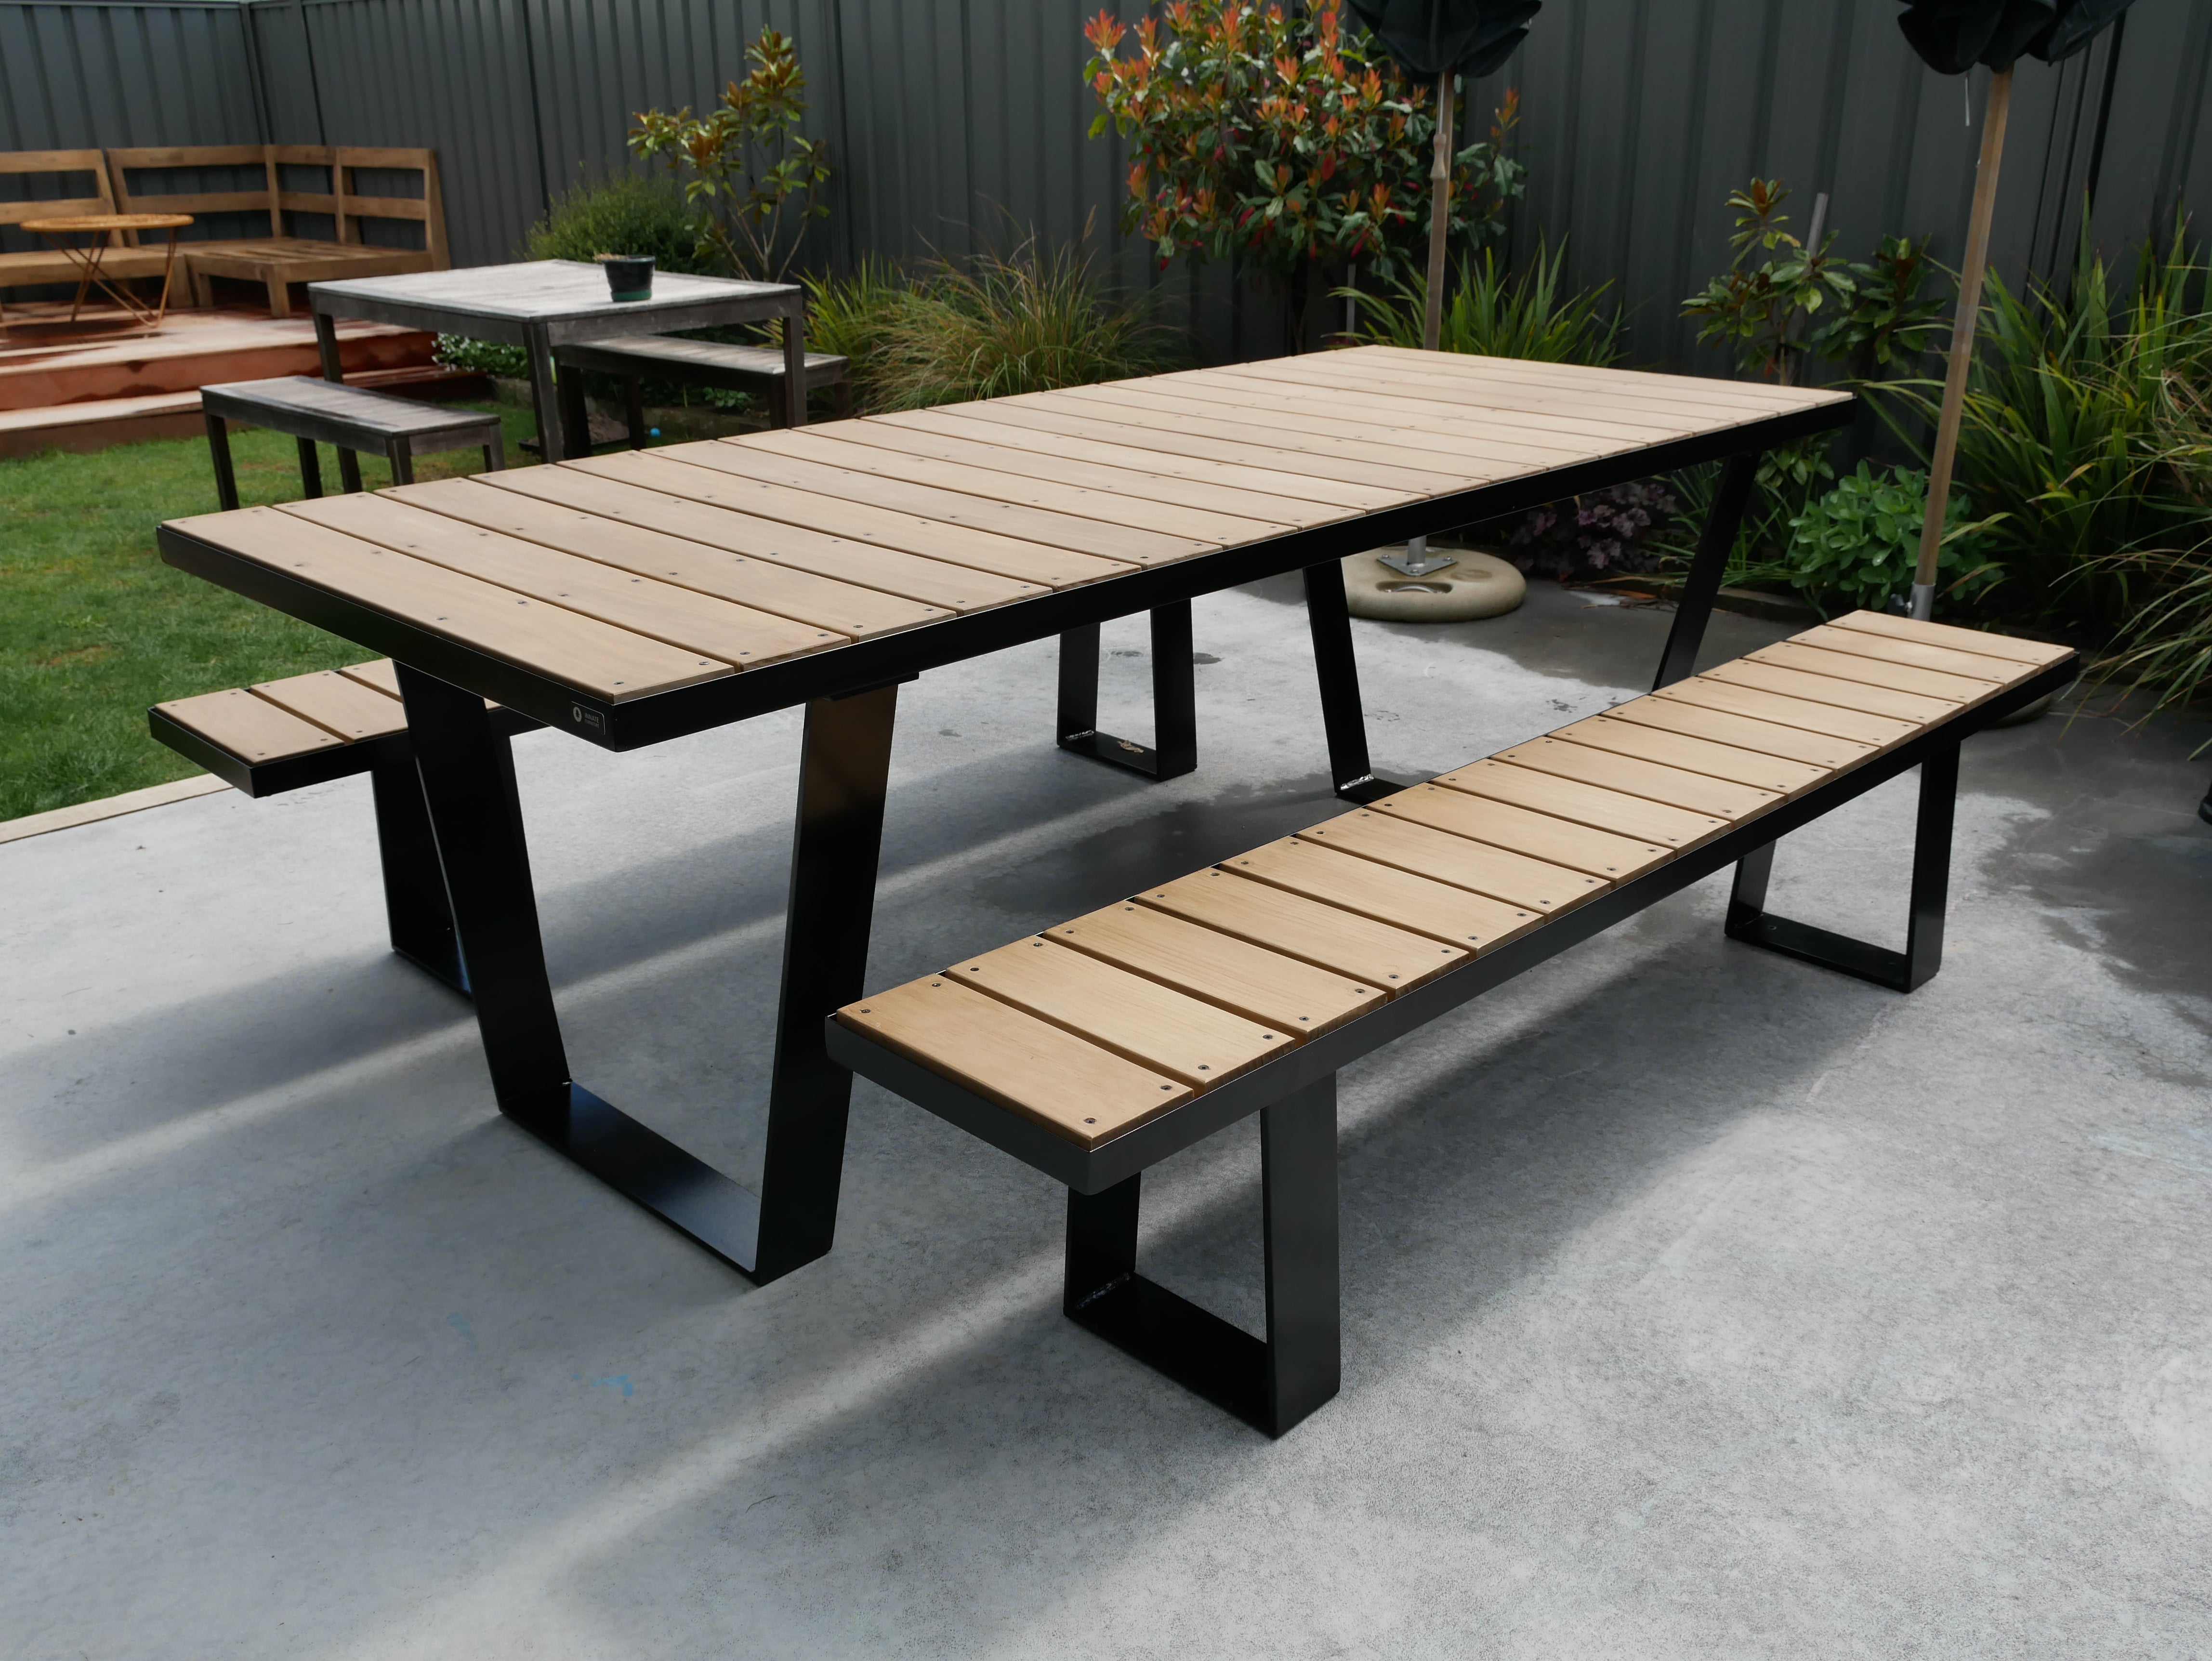 Exterior Dining Table - Angled Frame